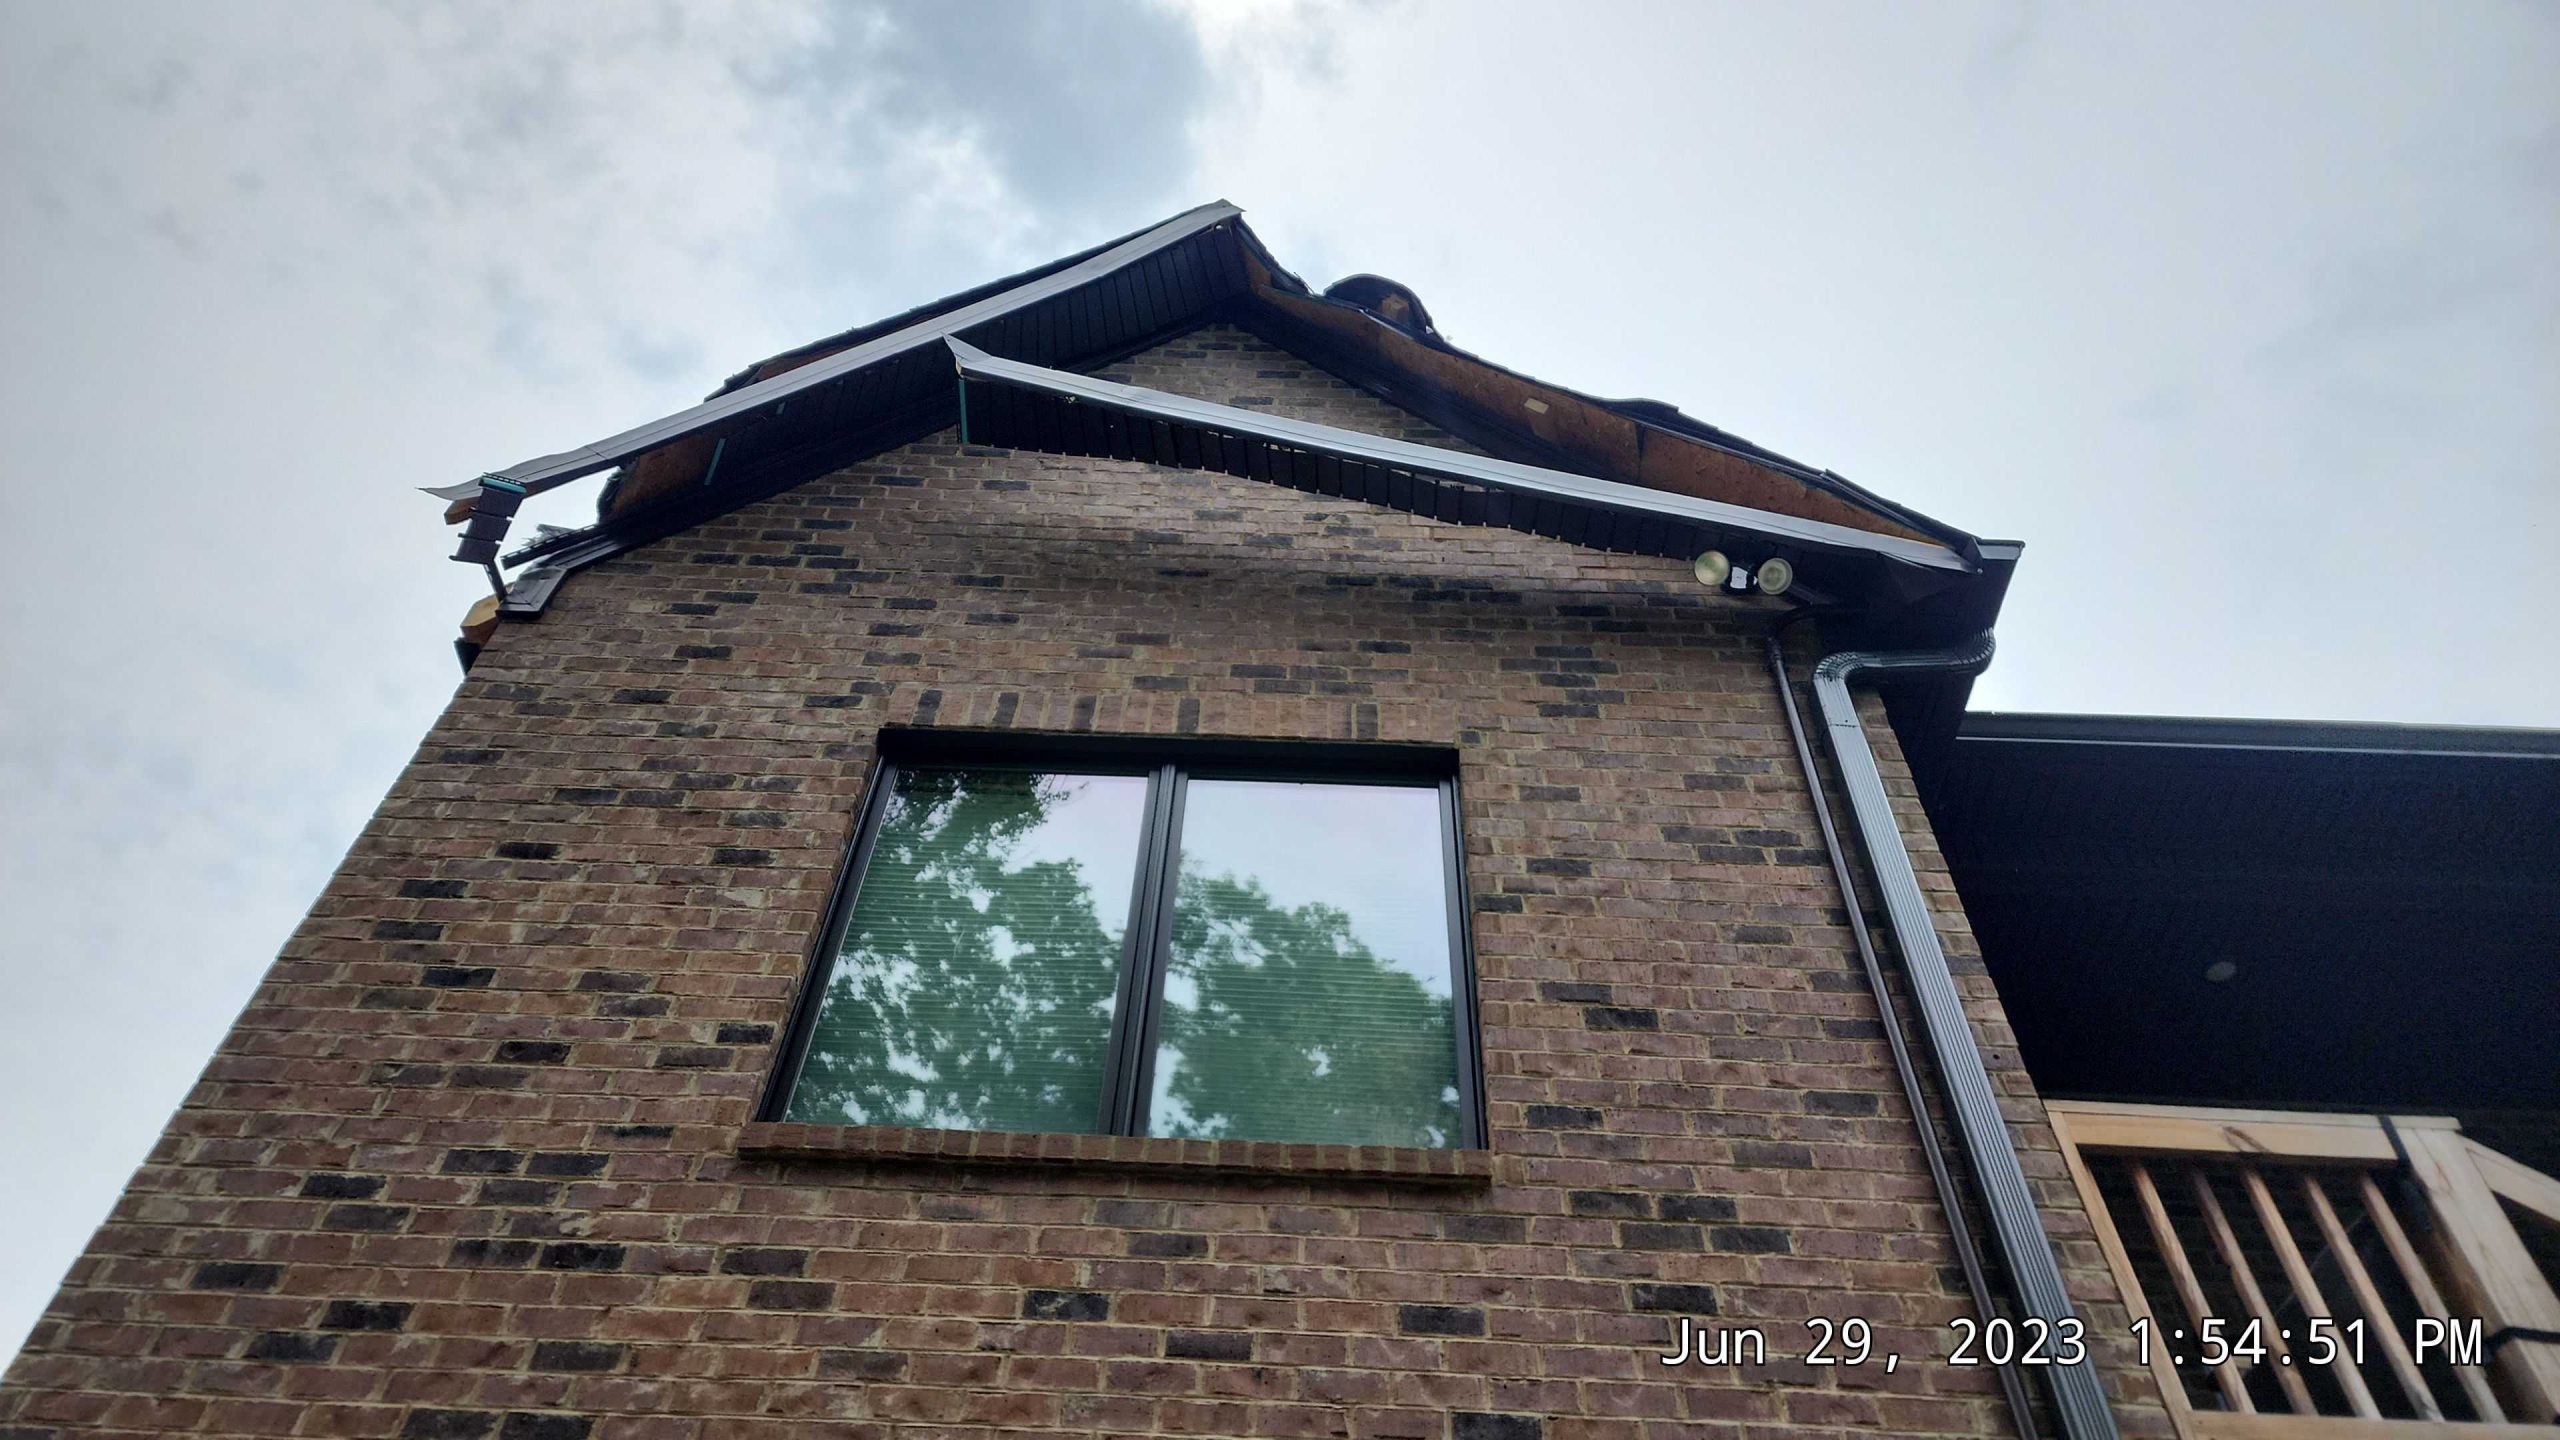 Detached gutters and damaged shingles at roof line.